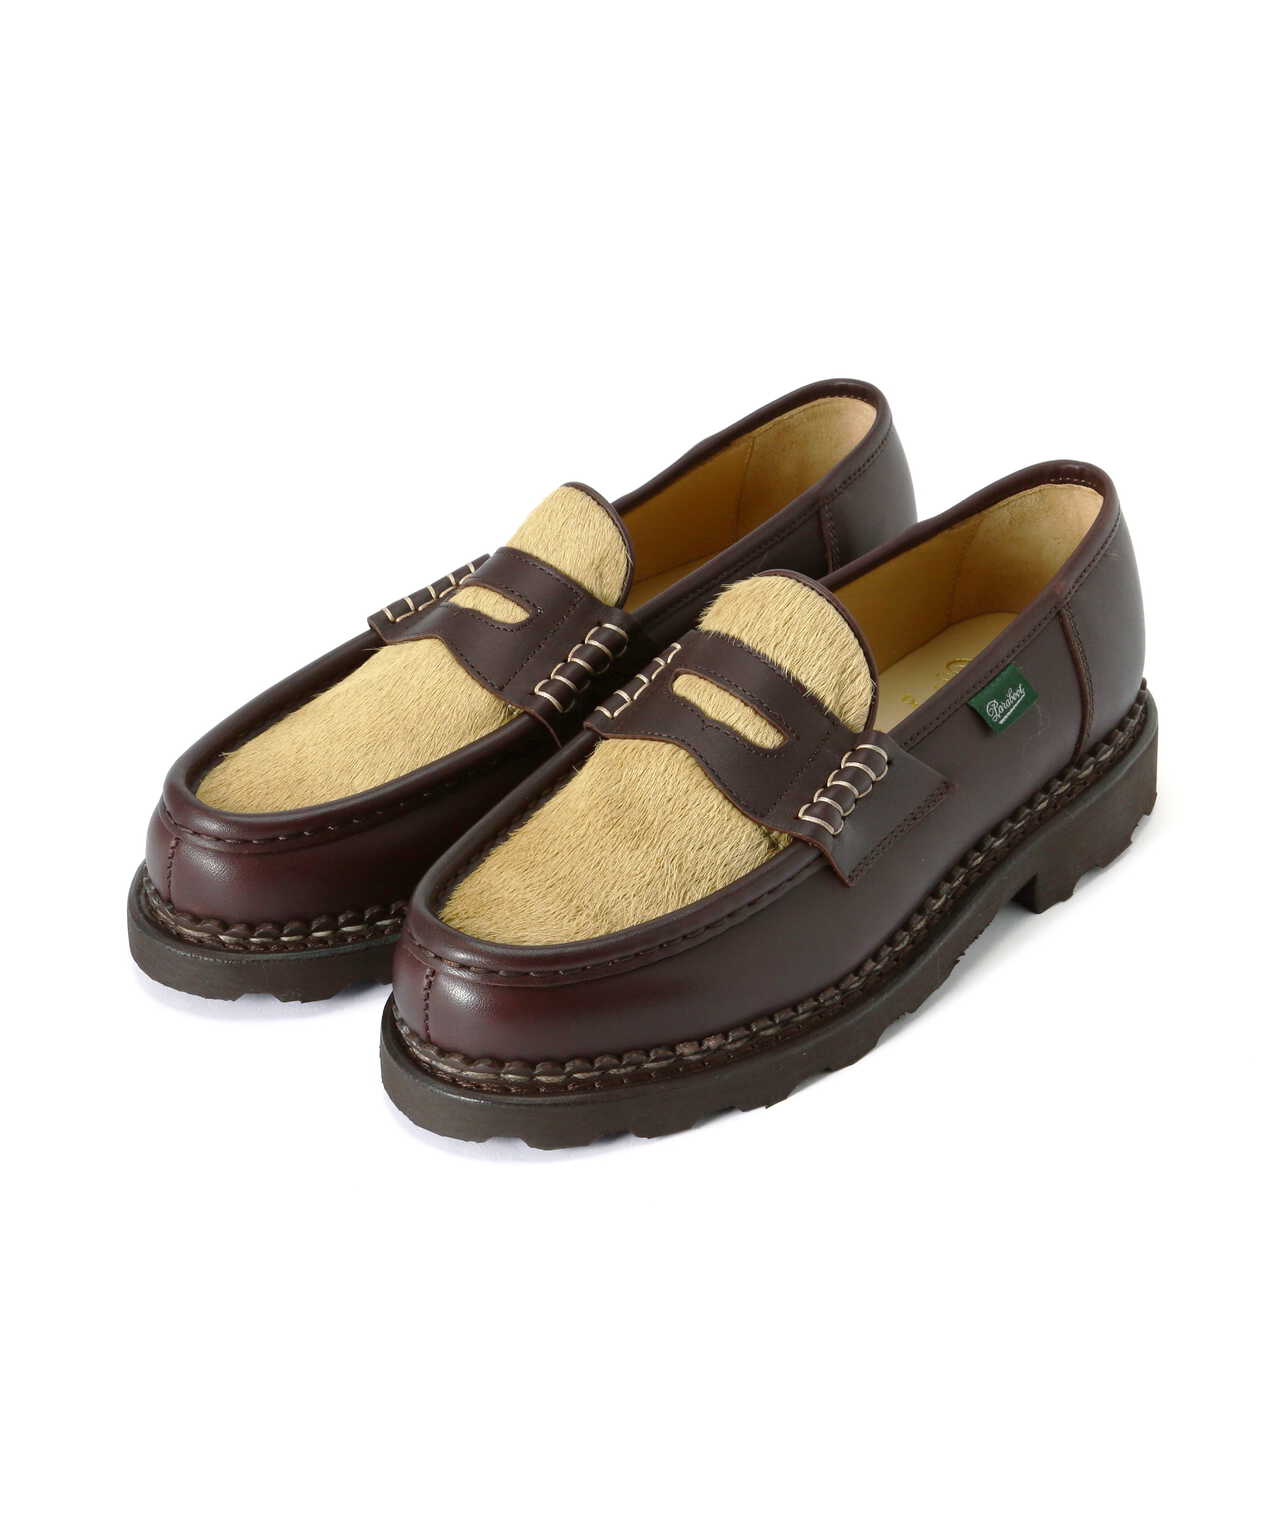 DROLE DE MONSIEUR X PARABOOT LOAFER(アウトレット商品・箱に傷あり